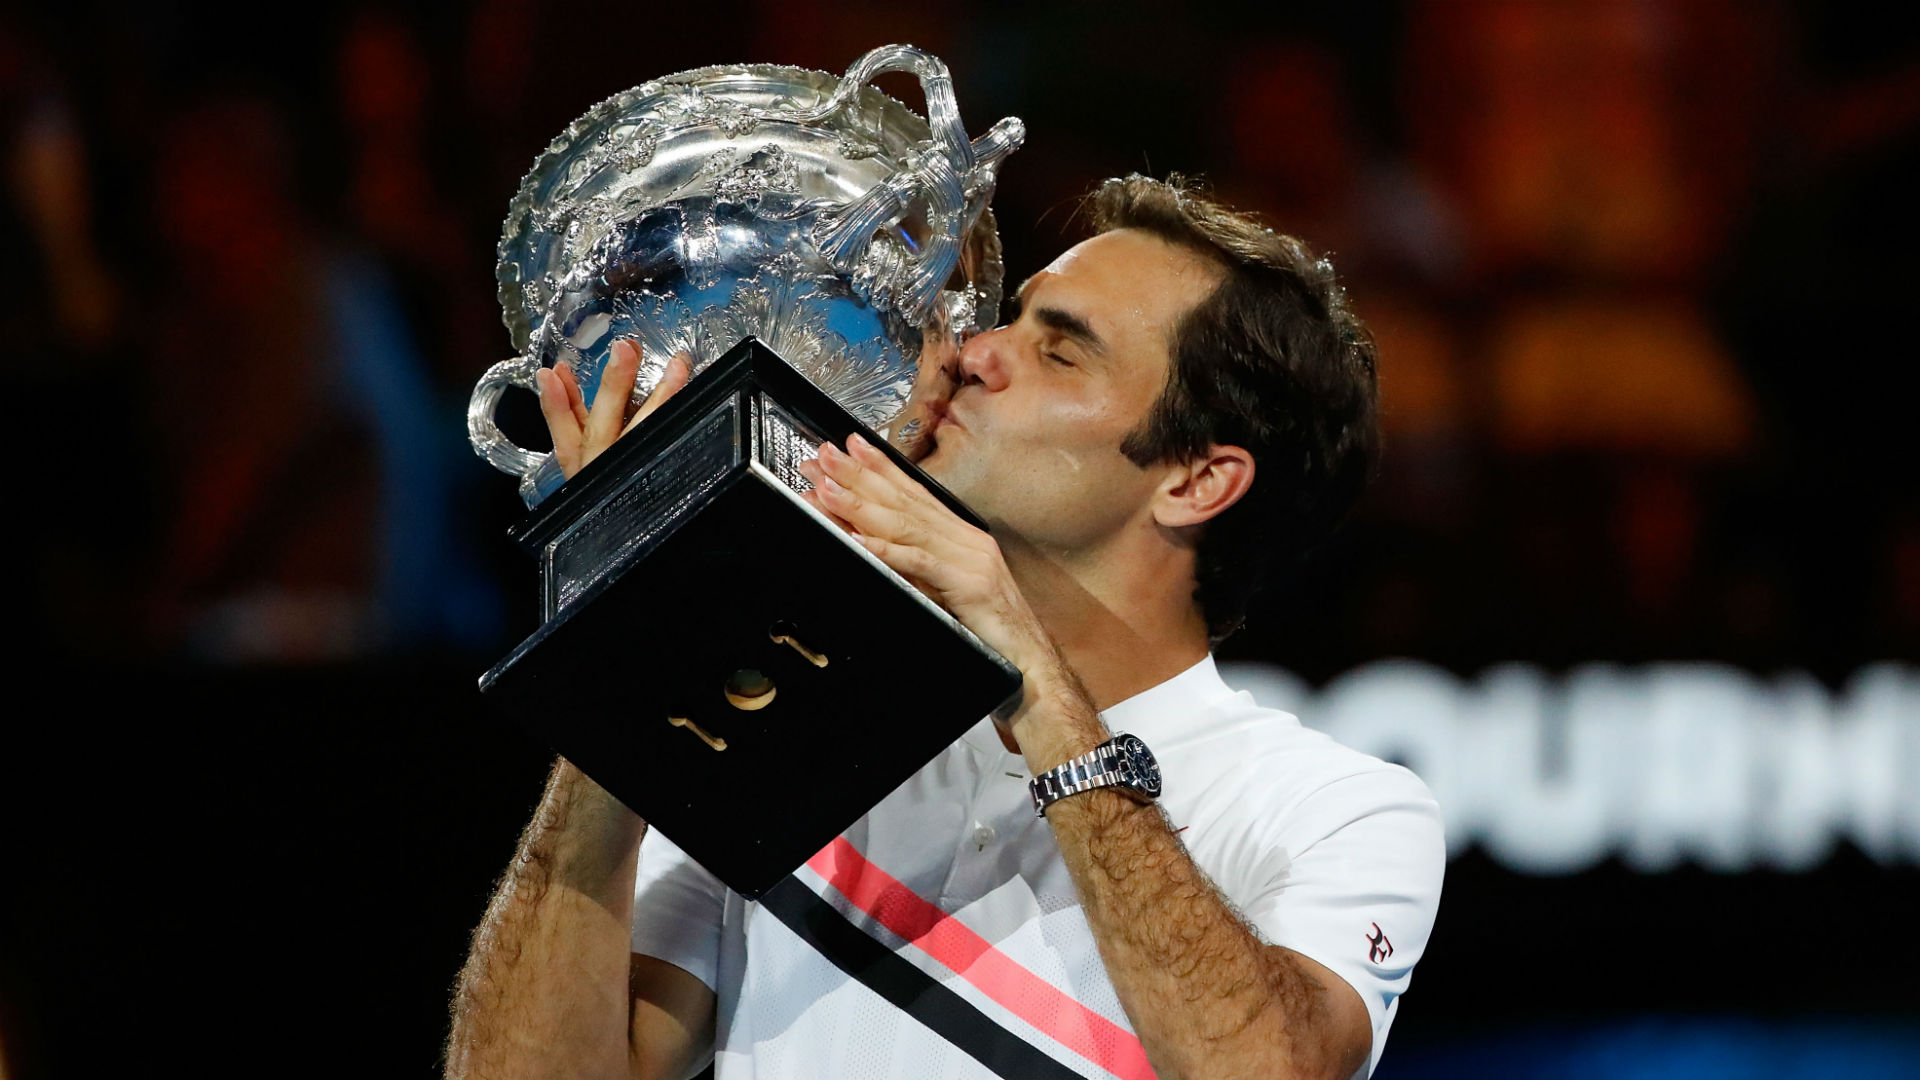 The Australian Open men's singles will see Roger Federer attempt to achieve a feat only Novak Djokovic has pulled off in the Open Era.